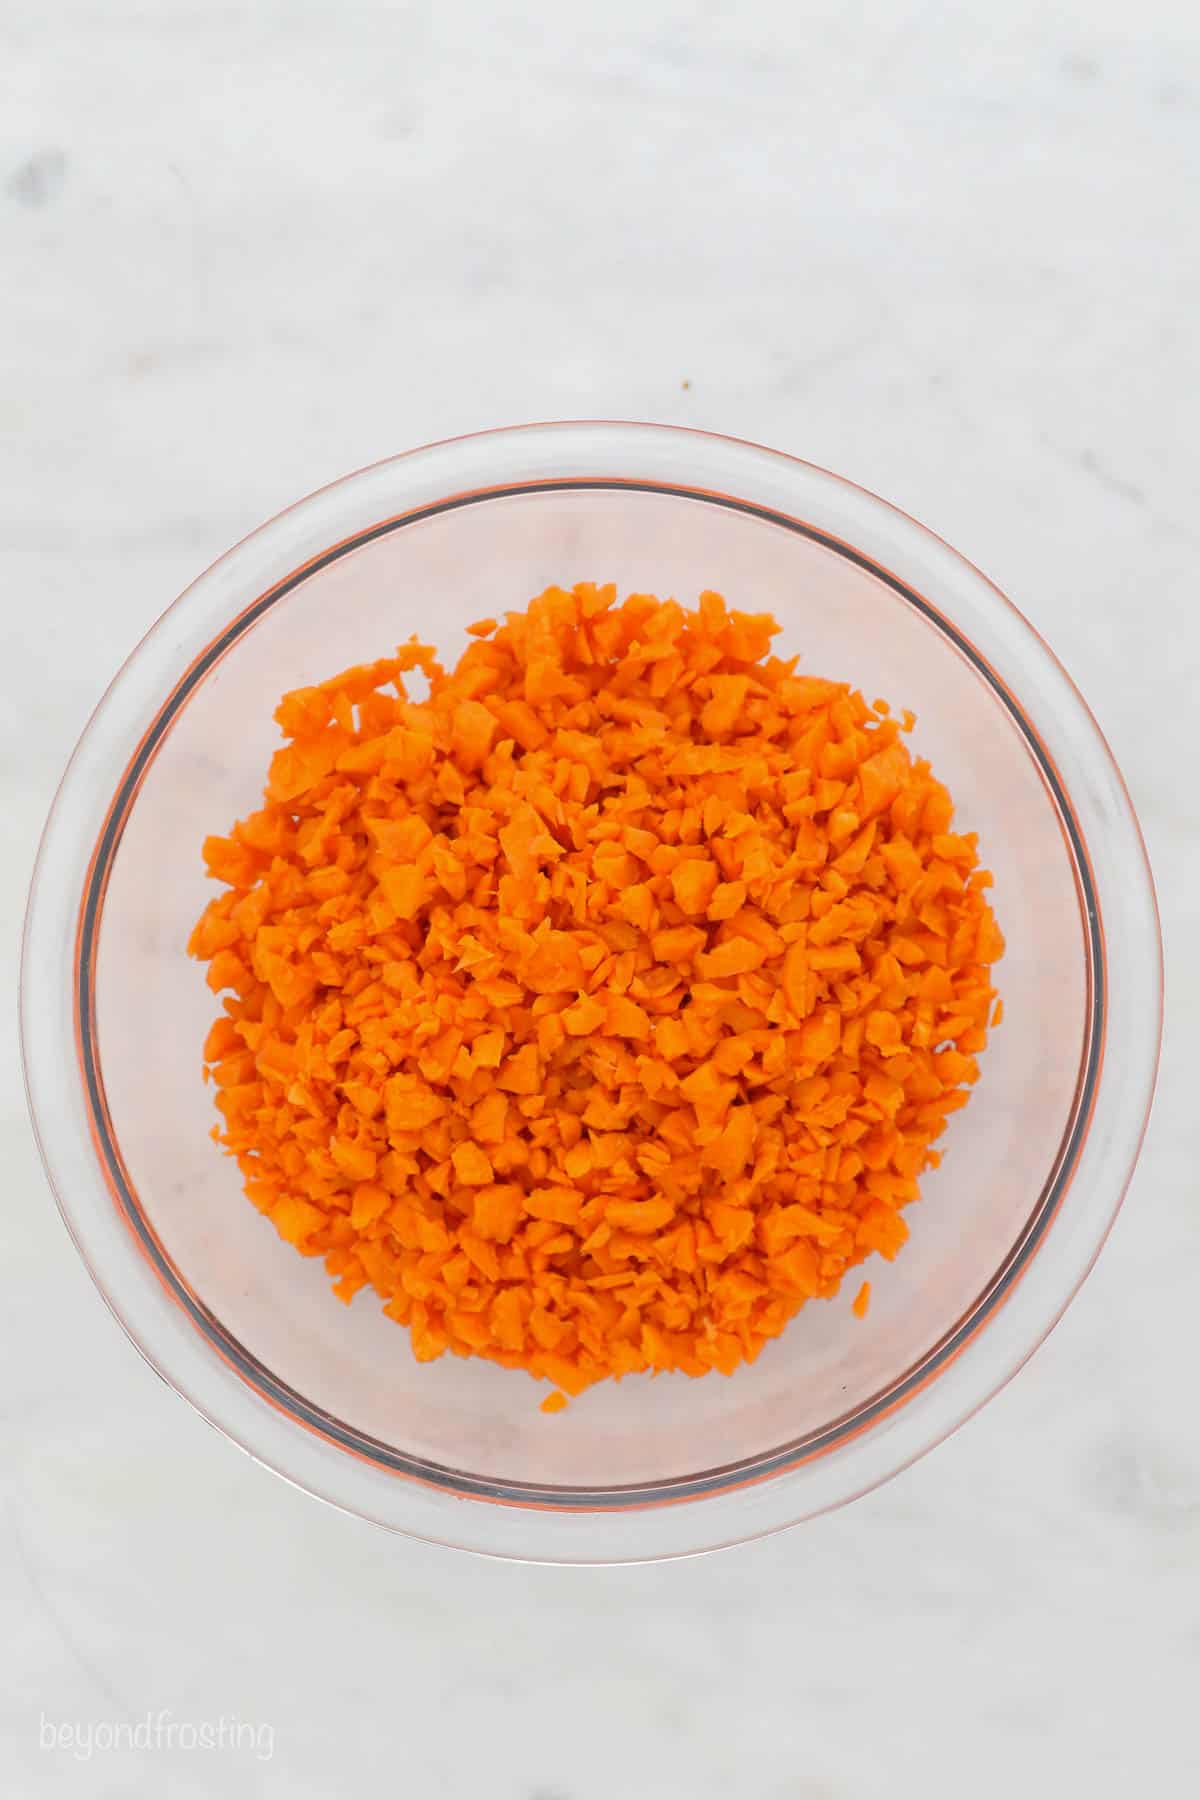 a glass bowl with finley chopped carrots